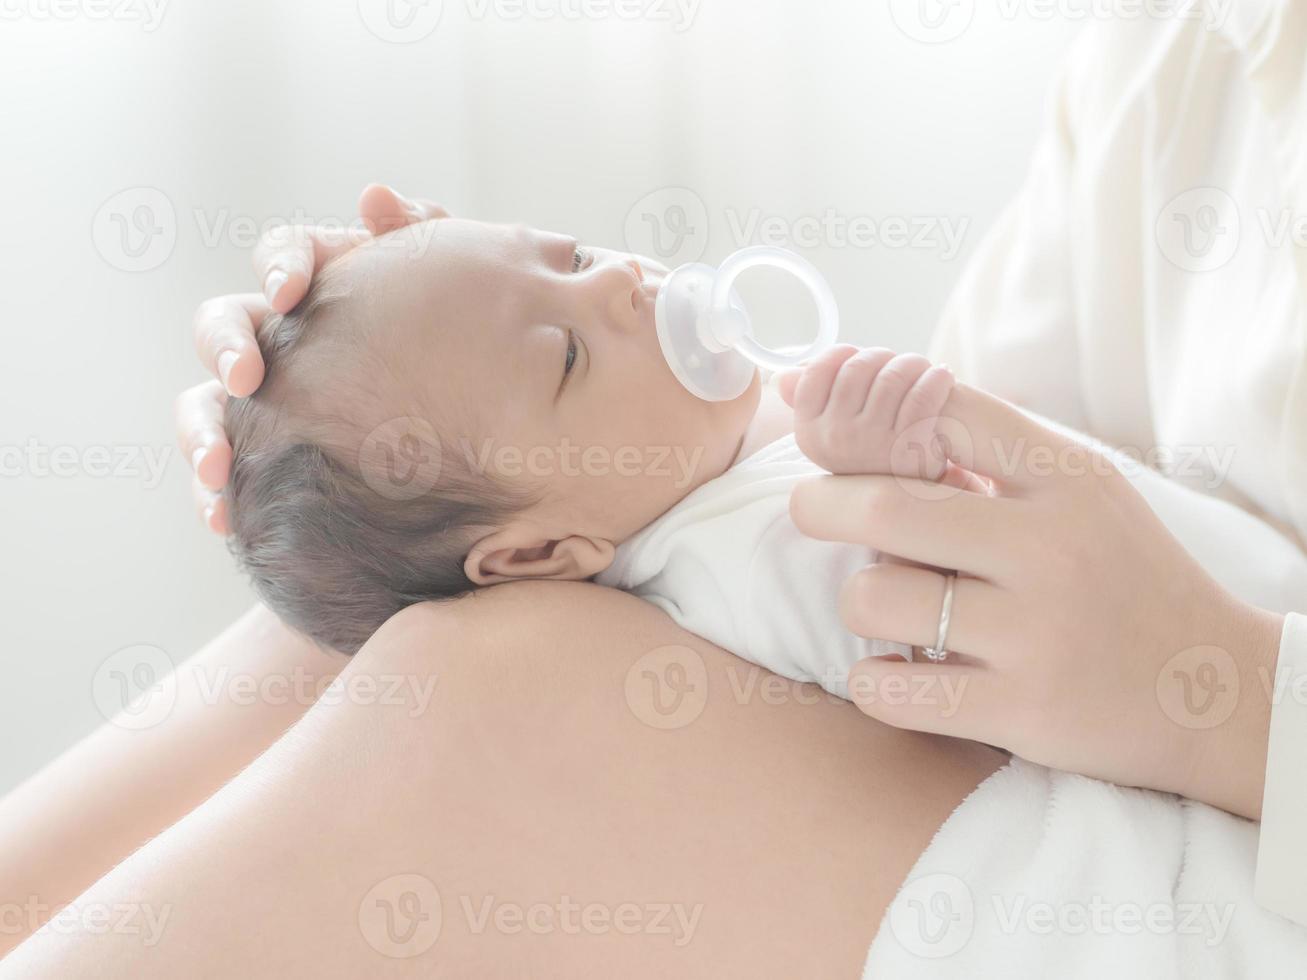 A beautiful Asian woman puts her newborn baby on her body photo